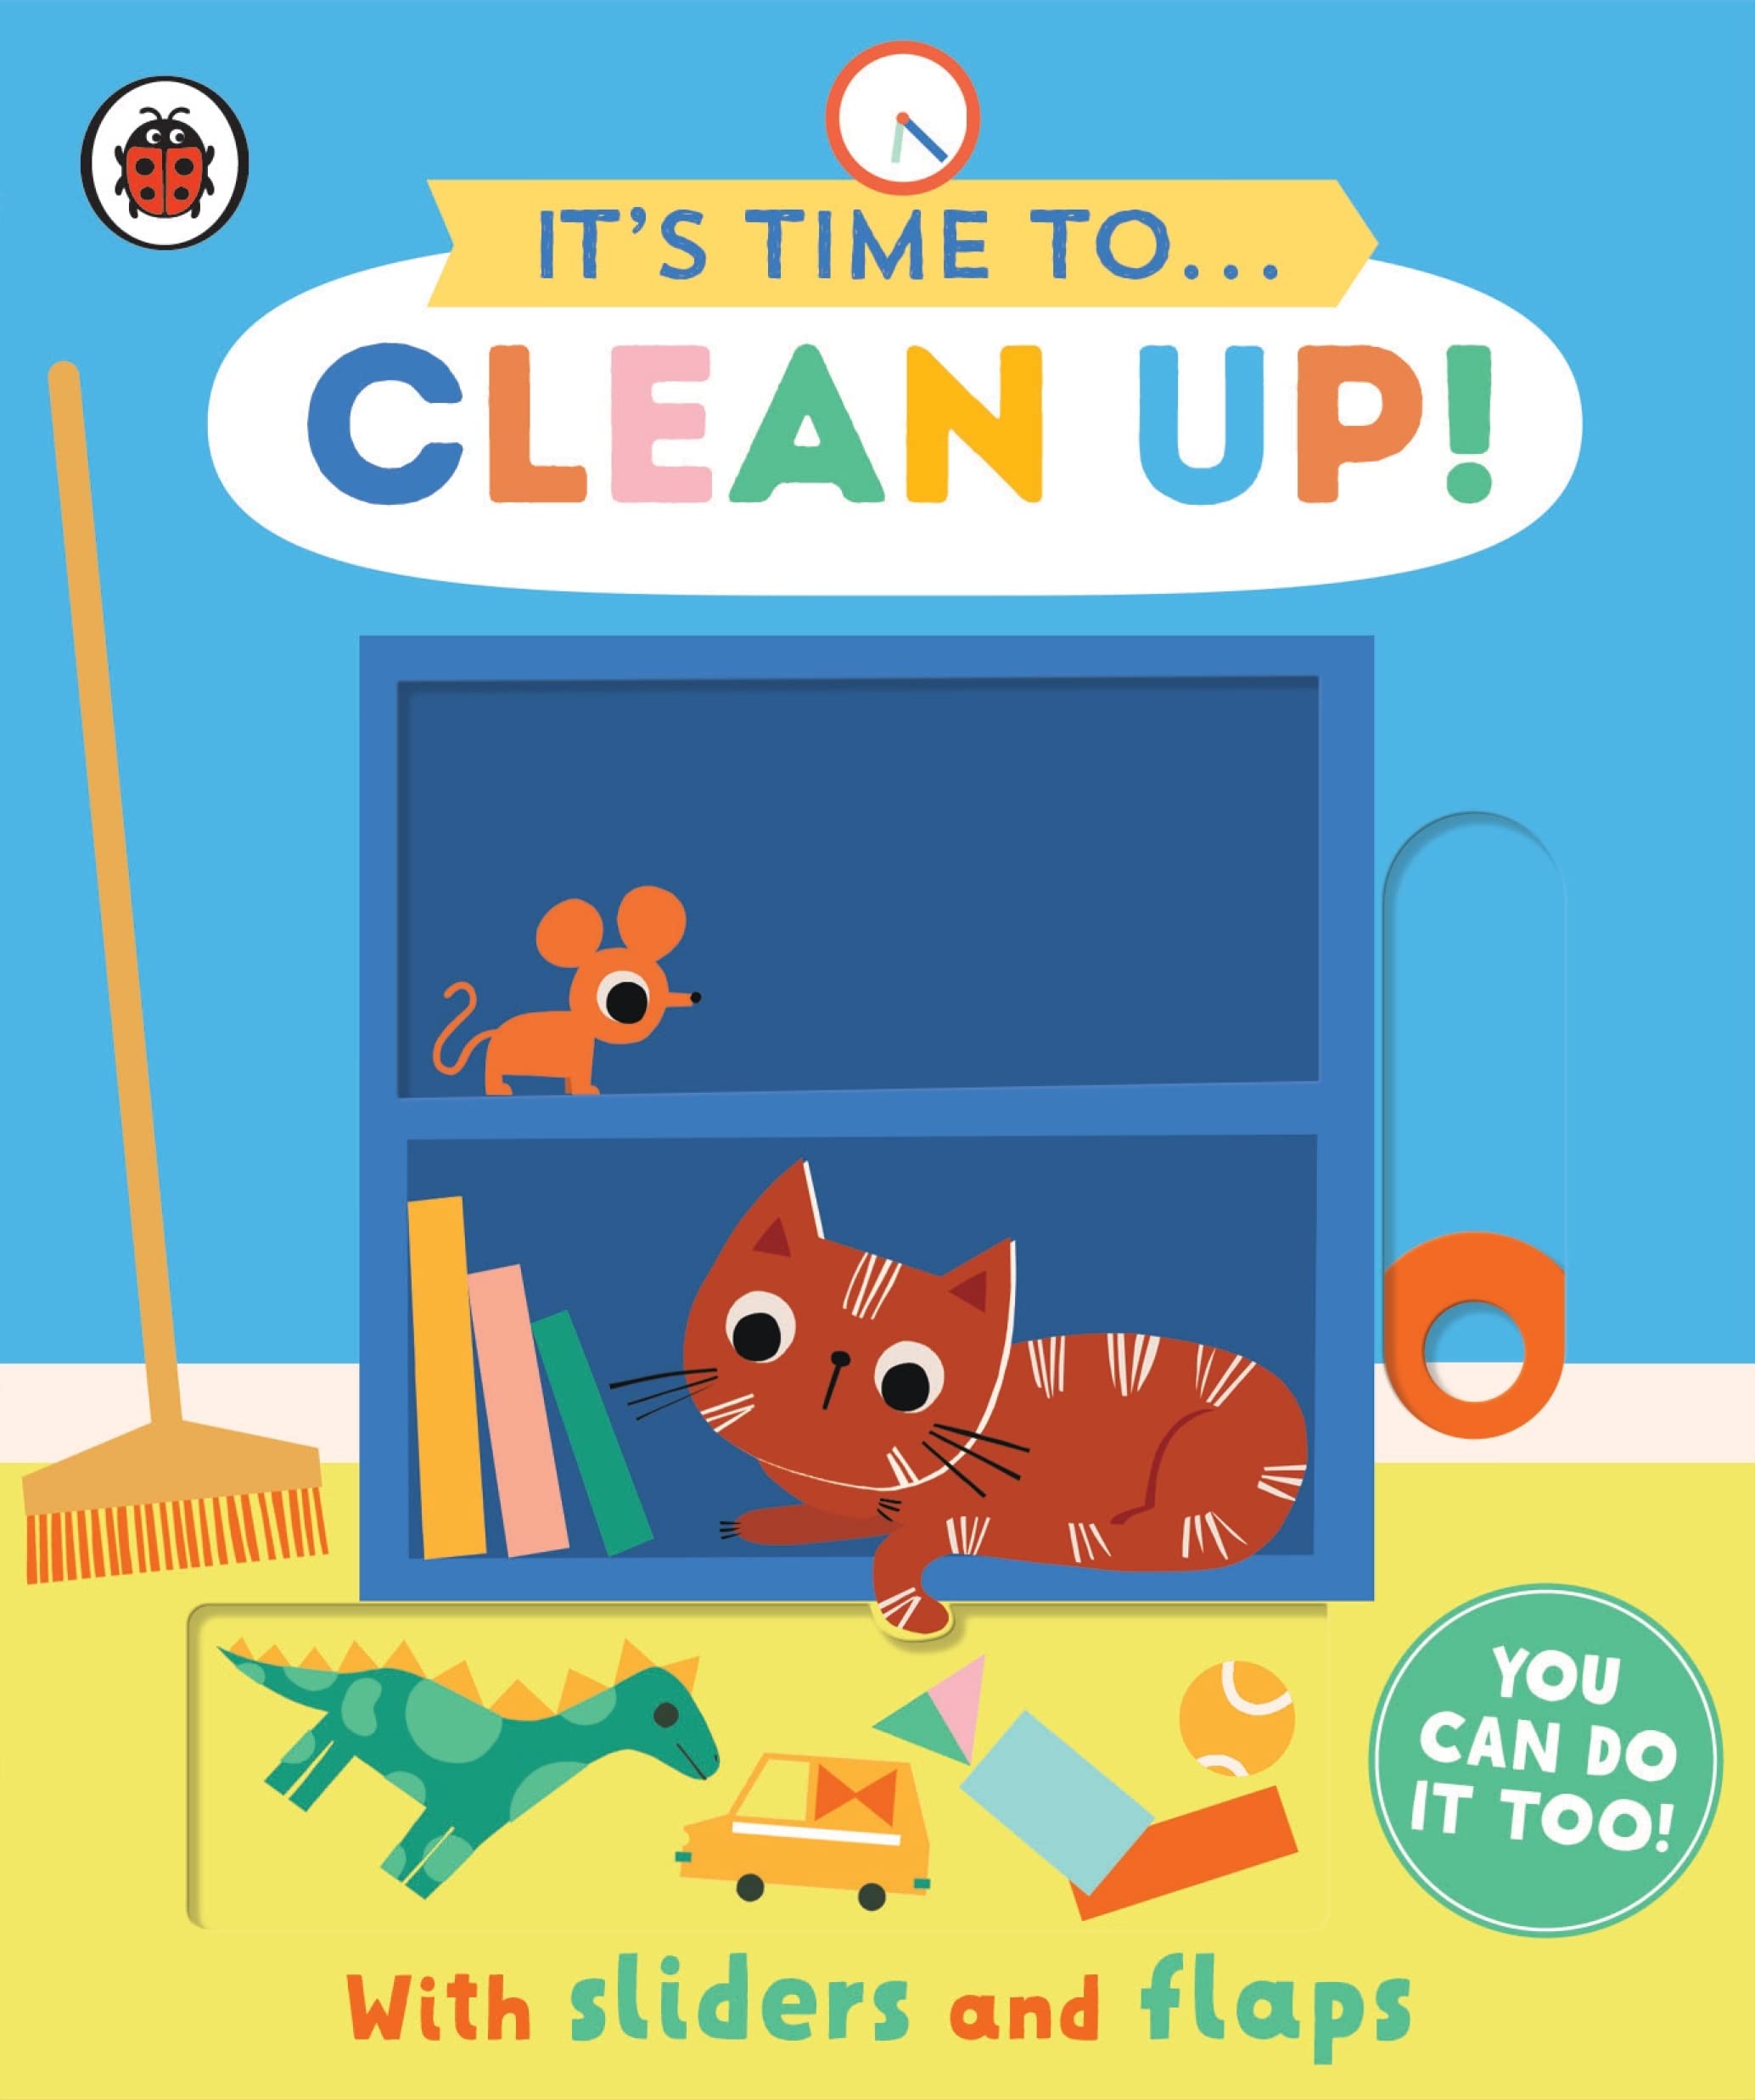 It's Time to... Clean Up! |  image20